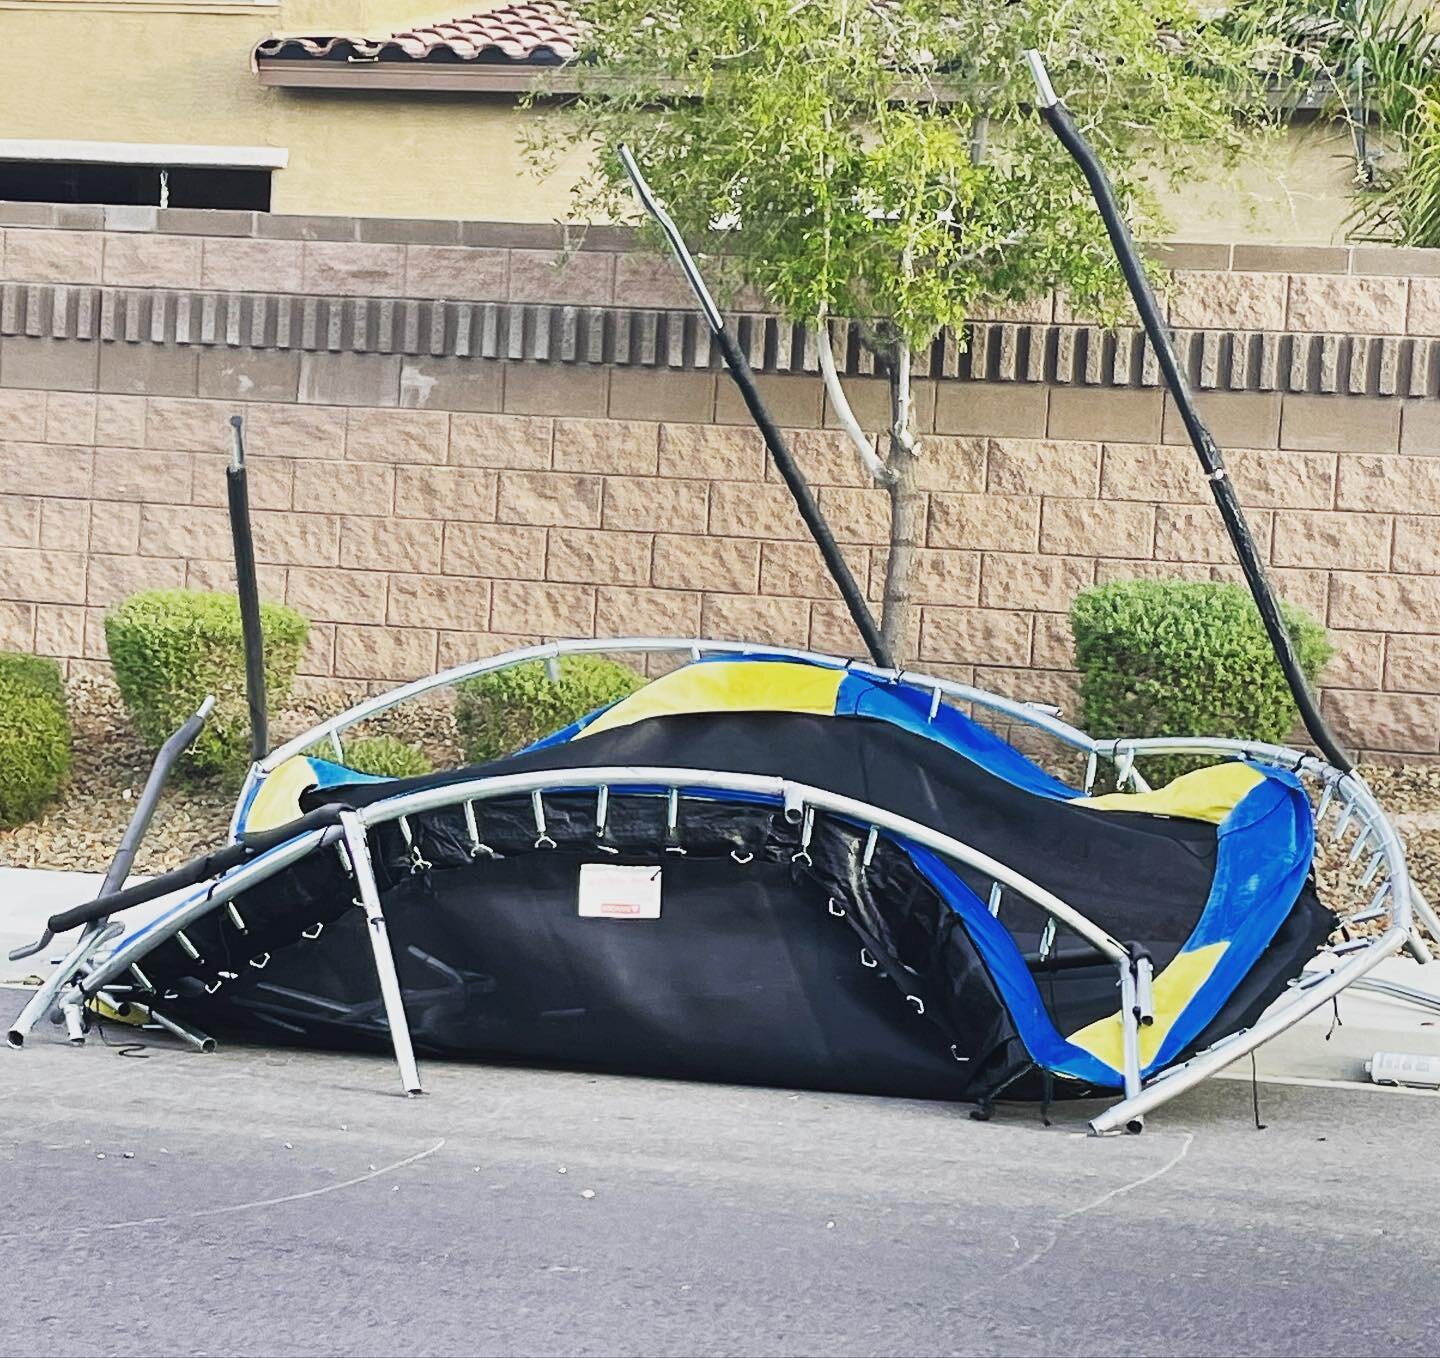 A bad week for trampolines 😳